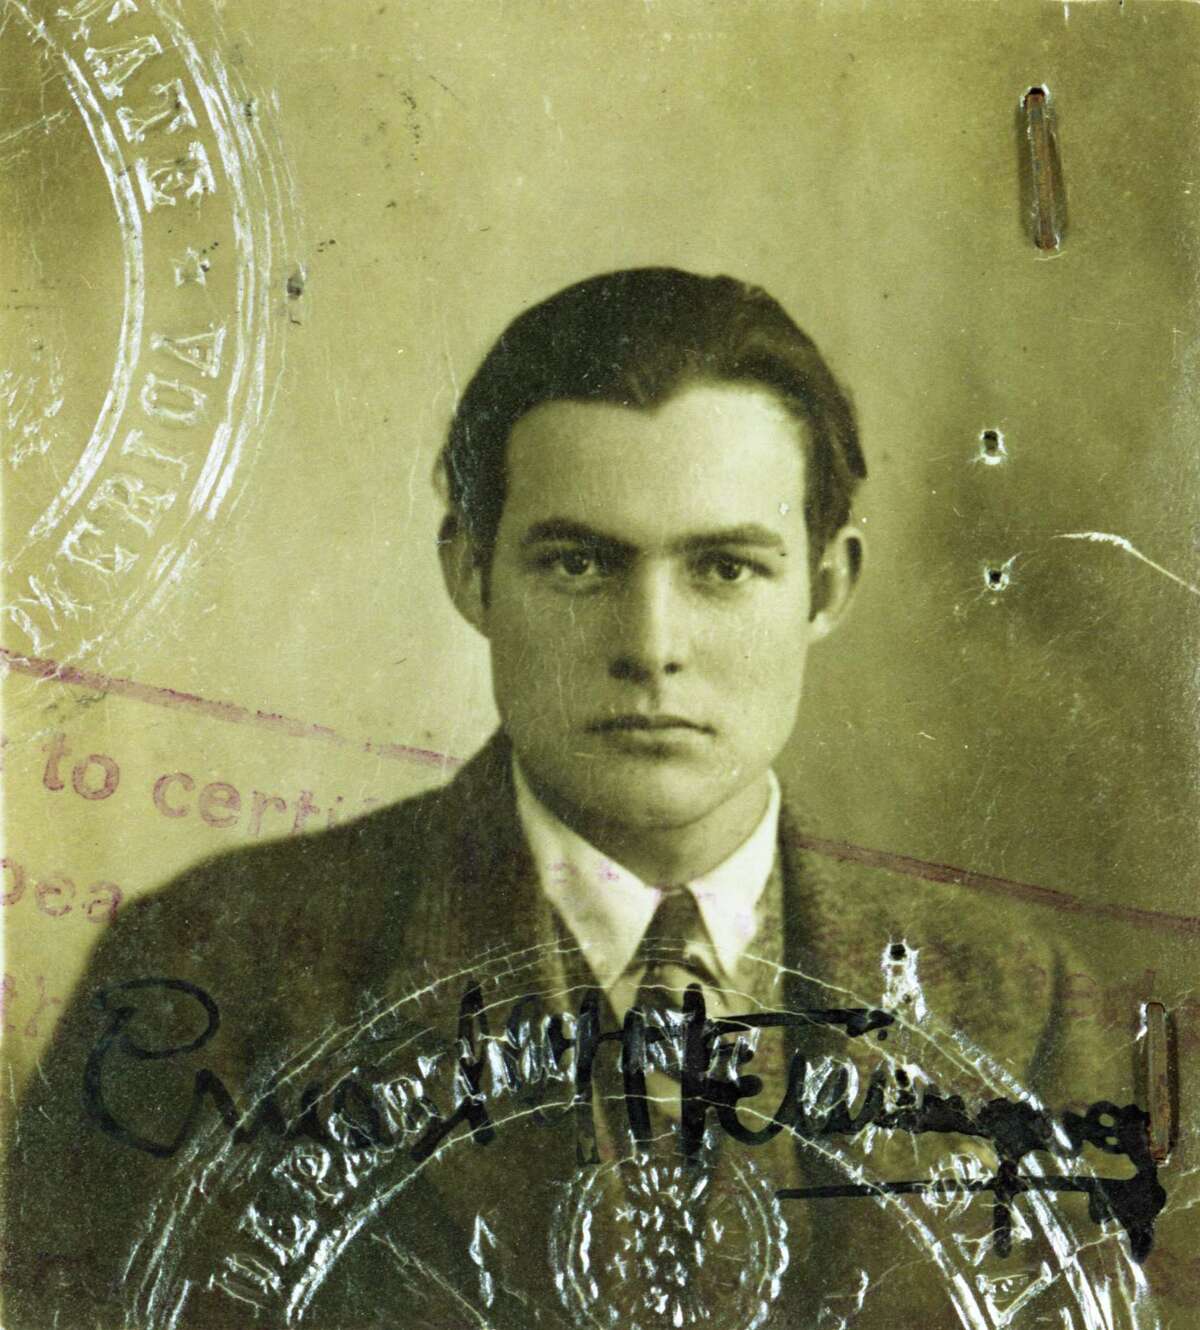 HemingwayÂ?’s 1923 passport photo. Â For the young journalist and writer, his trip to Paris was just the beginning of his travels. The Toronto Star and other news services would soon send him all over Europe on important stories.